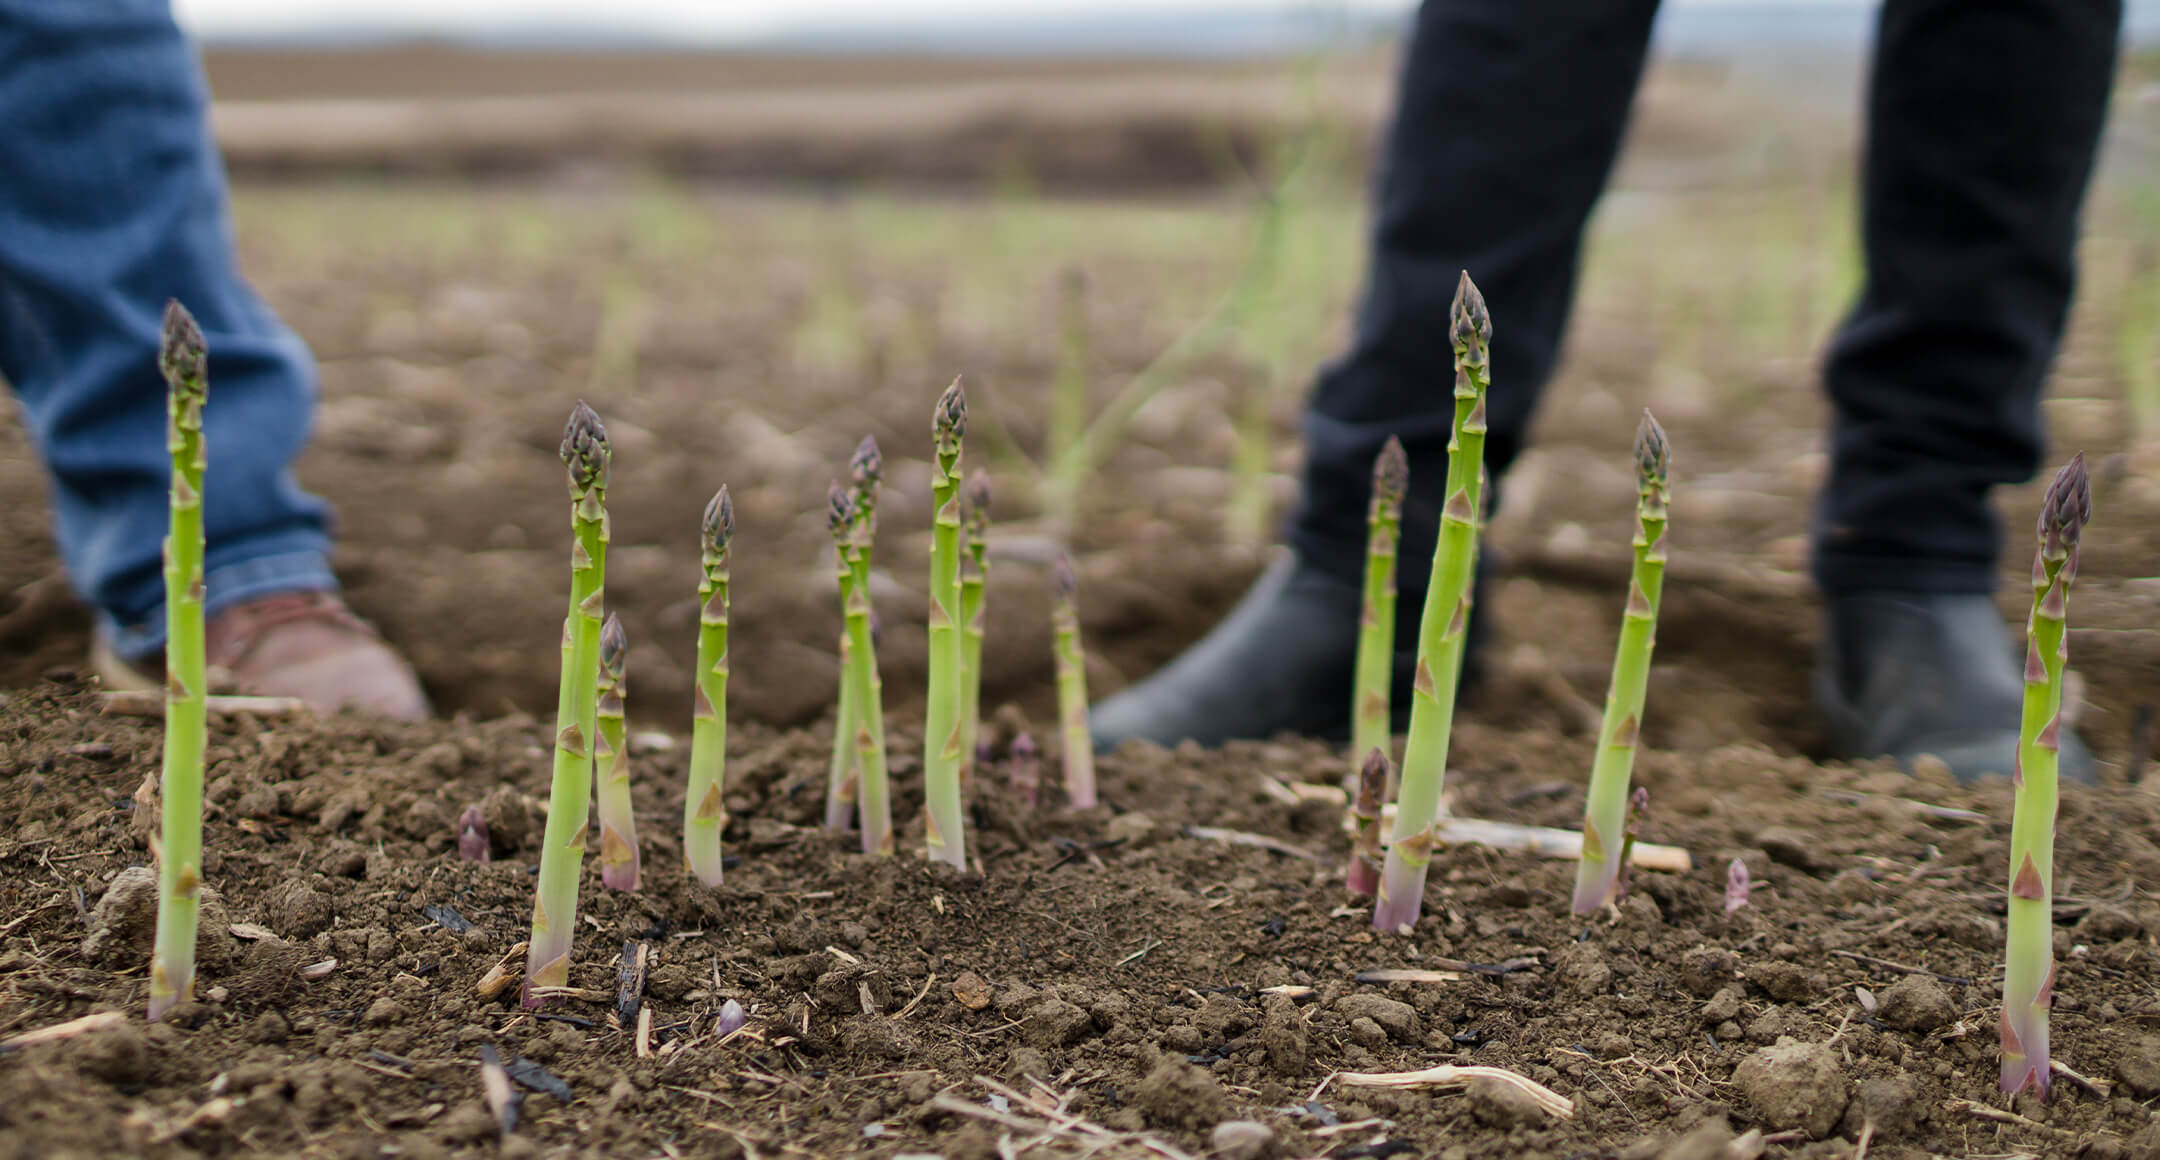 Asparagus spears growing out of the soil.